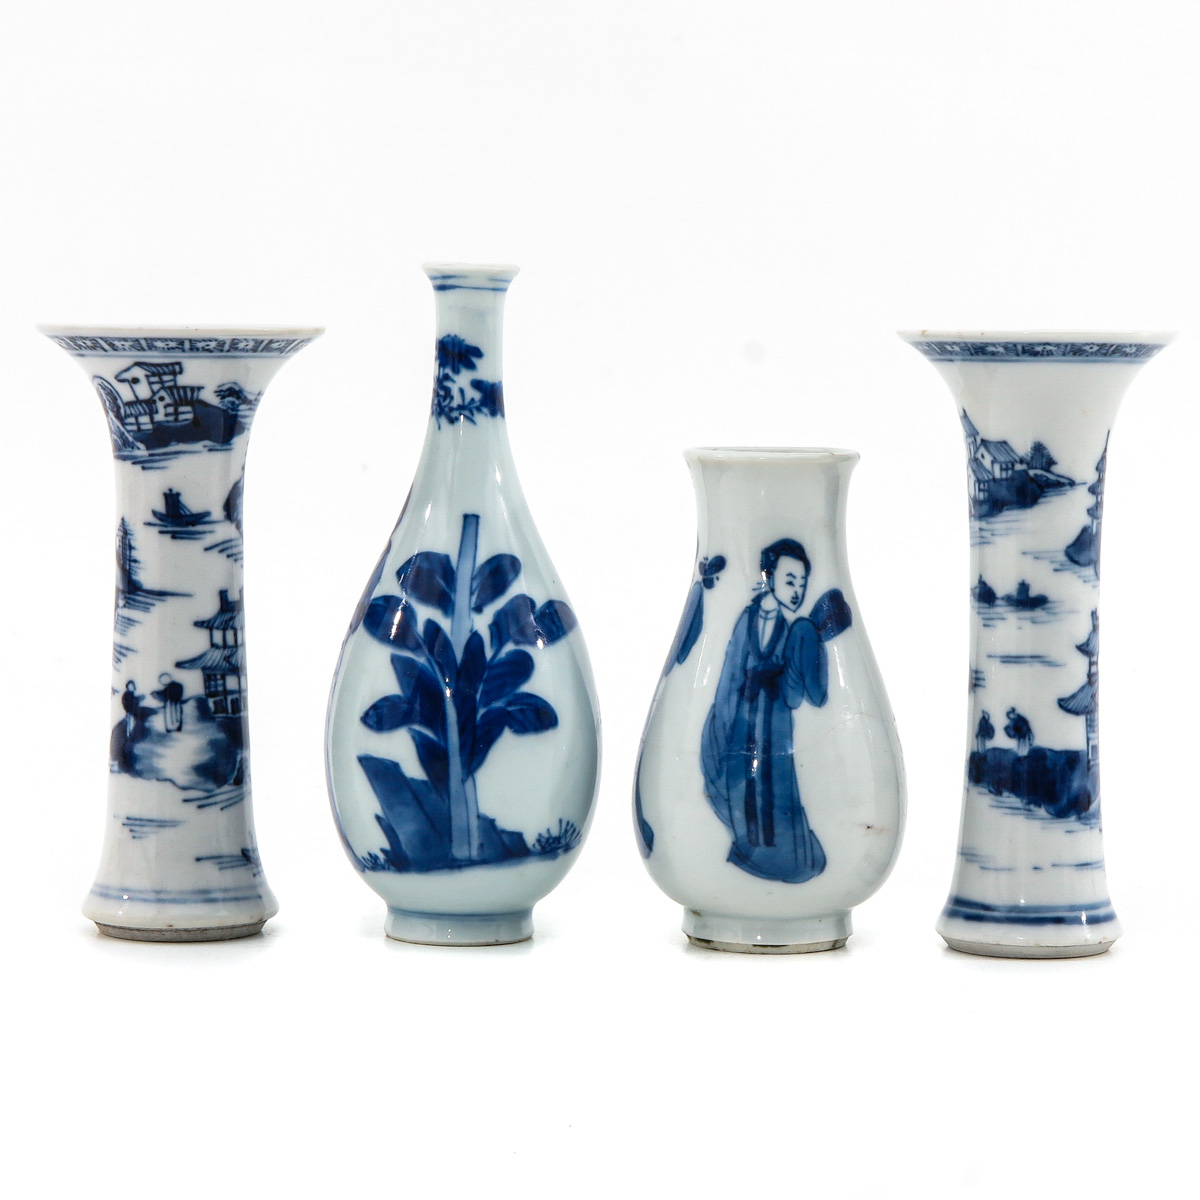 A Collection of 4 Miniature Vases - Image 3 of 10